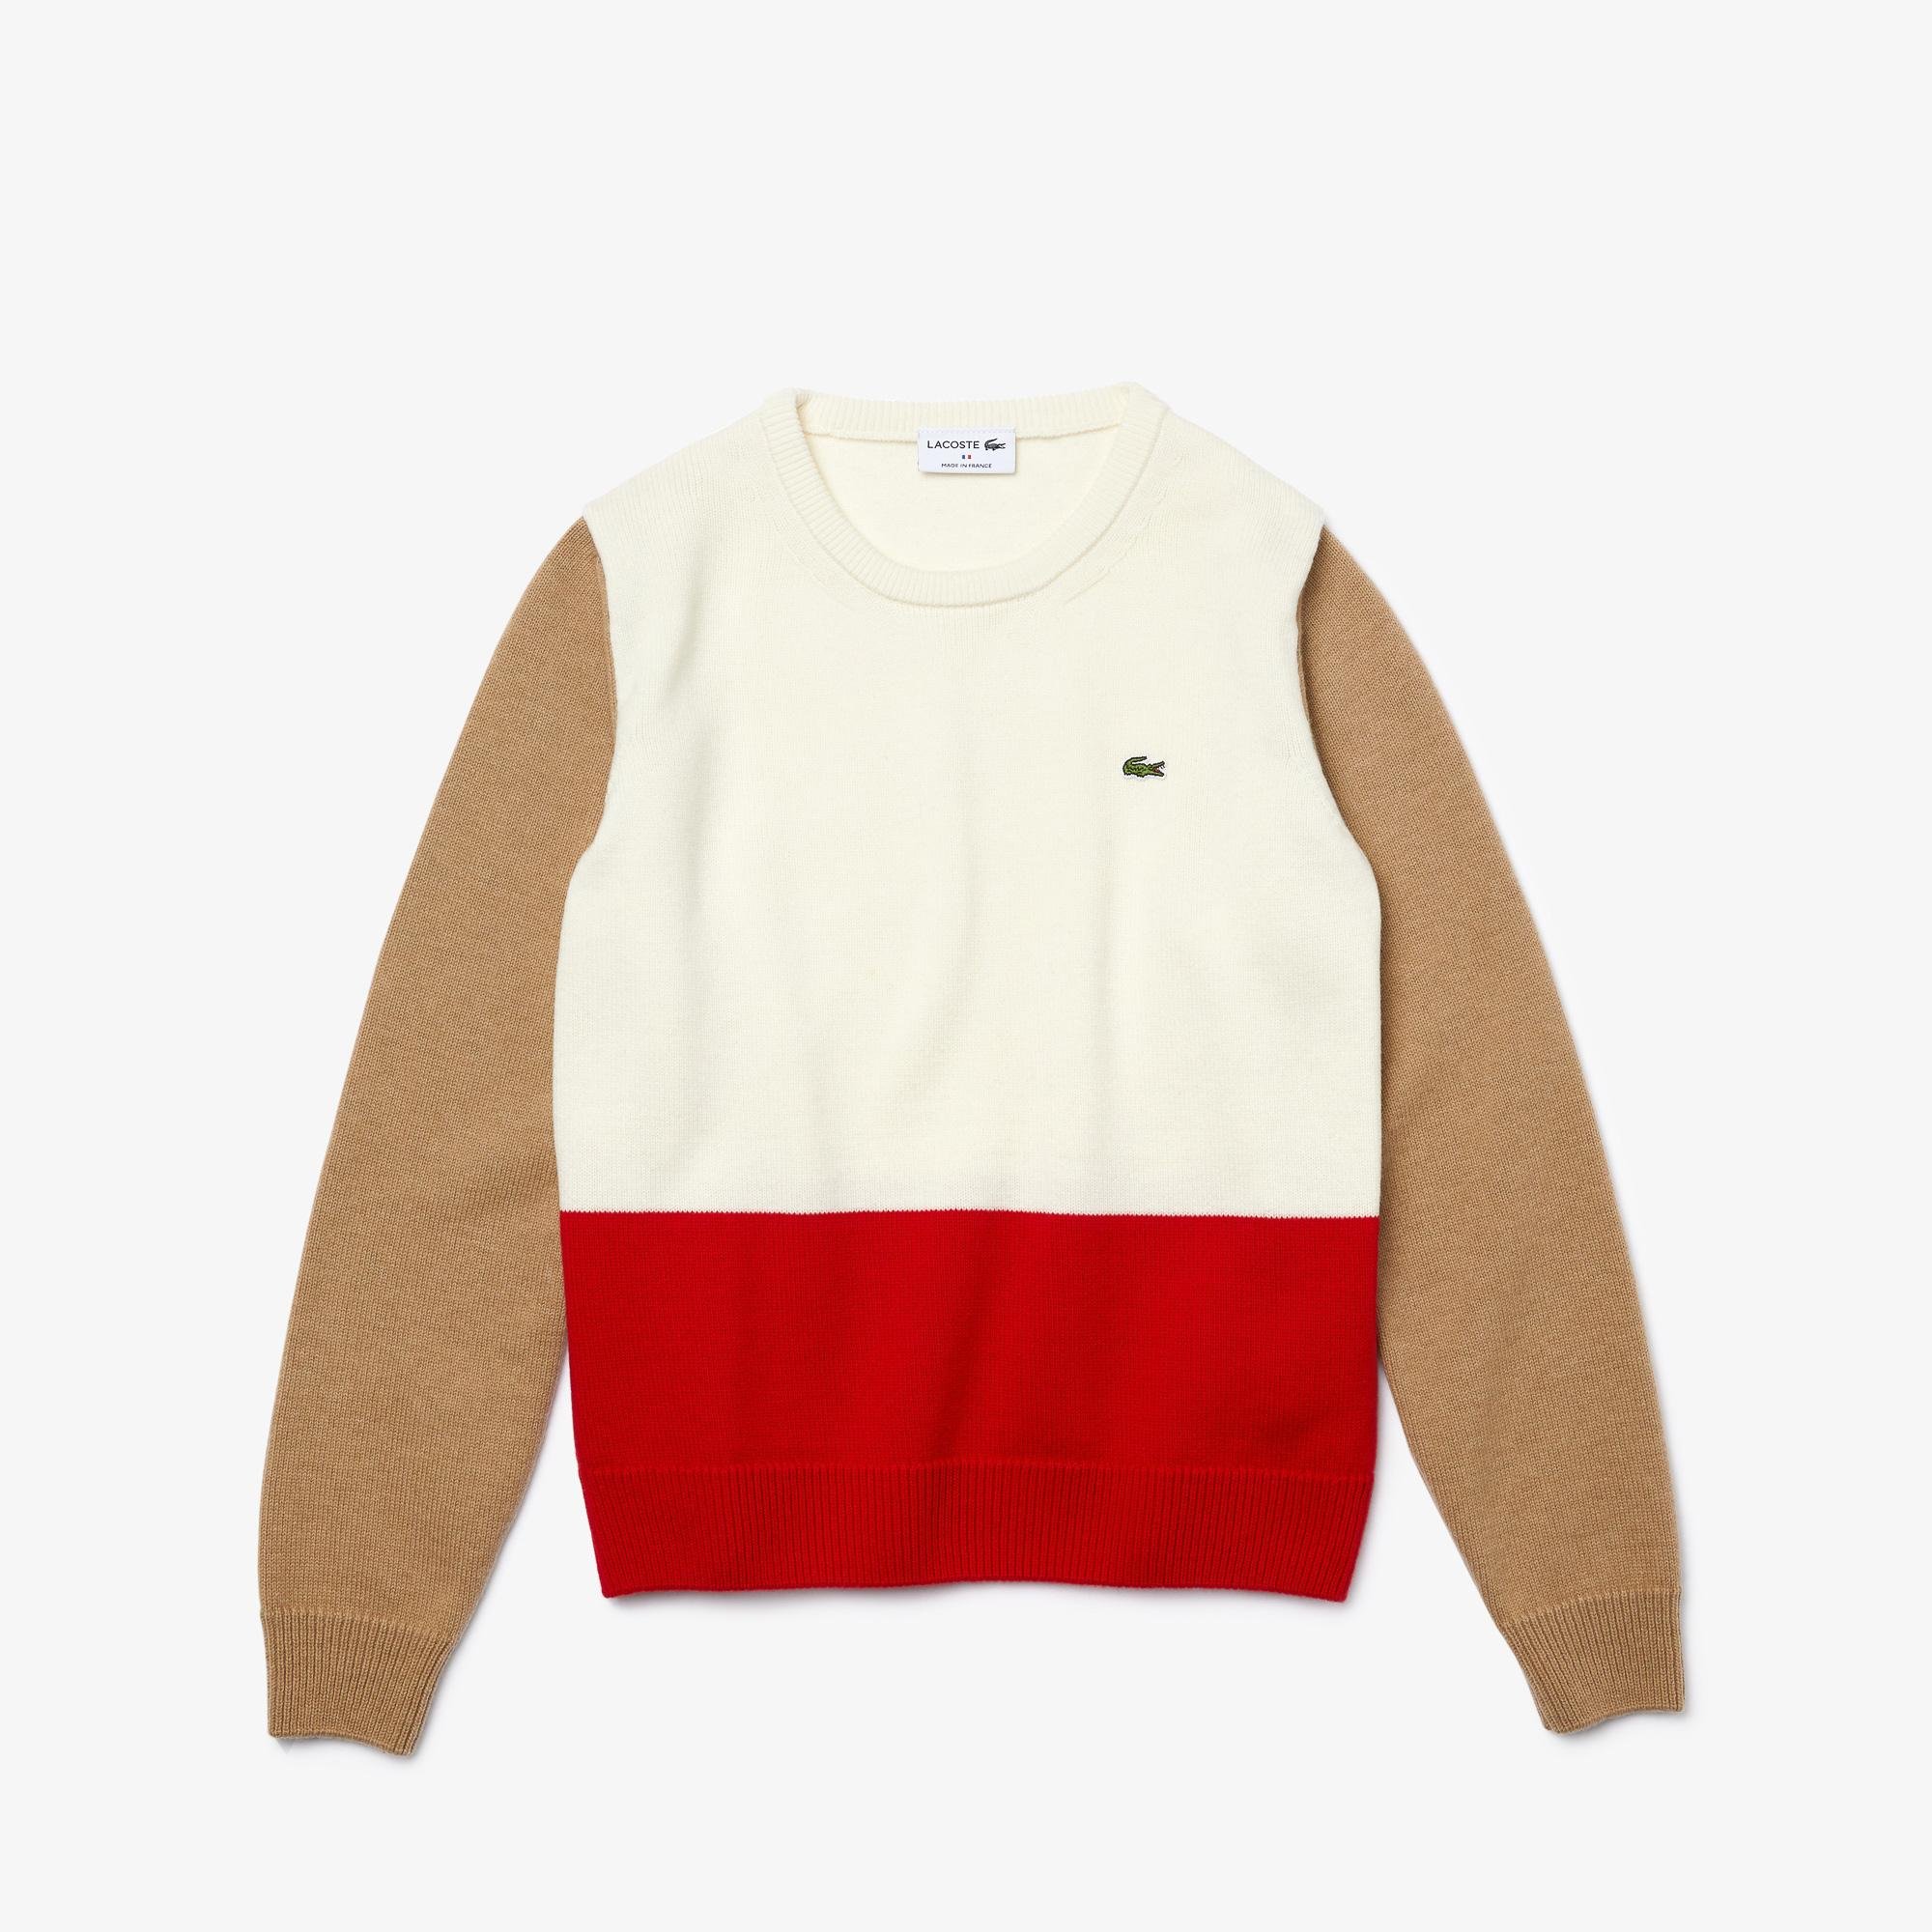 Lacoste Women's Made in France Crew Neck Colorblock Wool Sweater